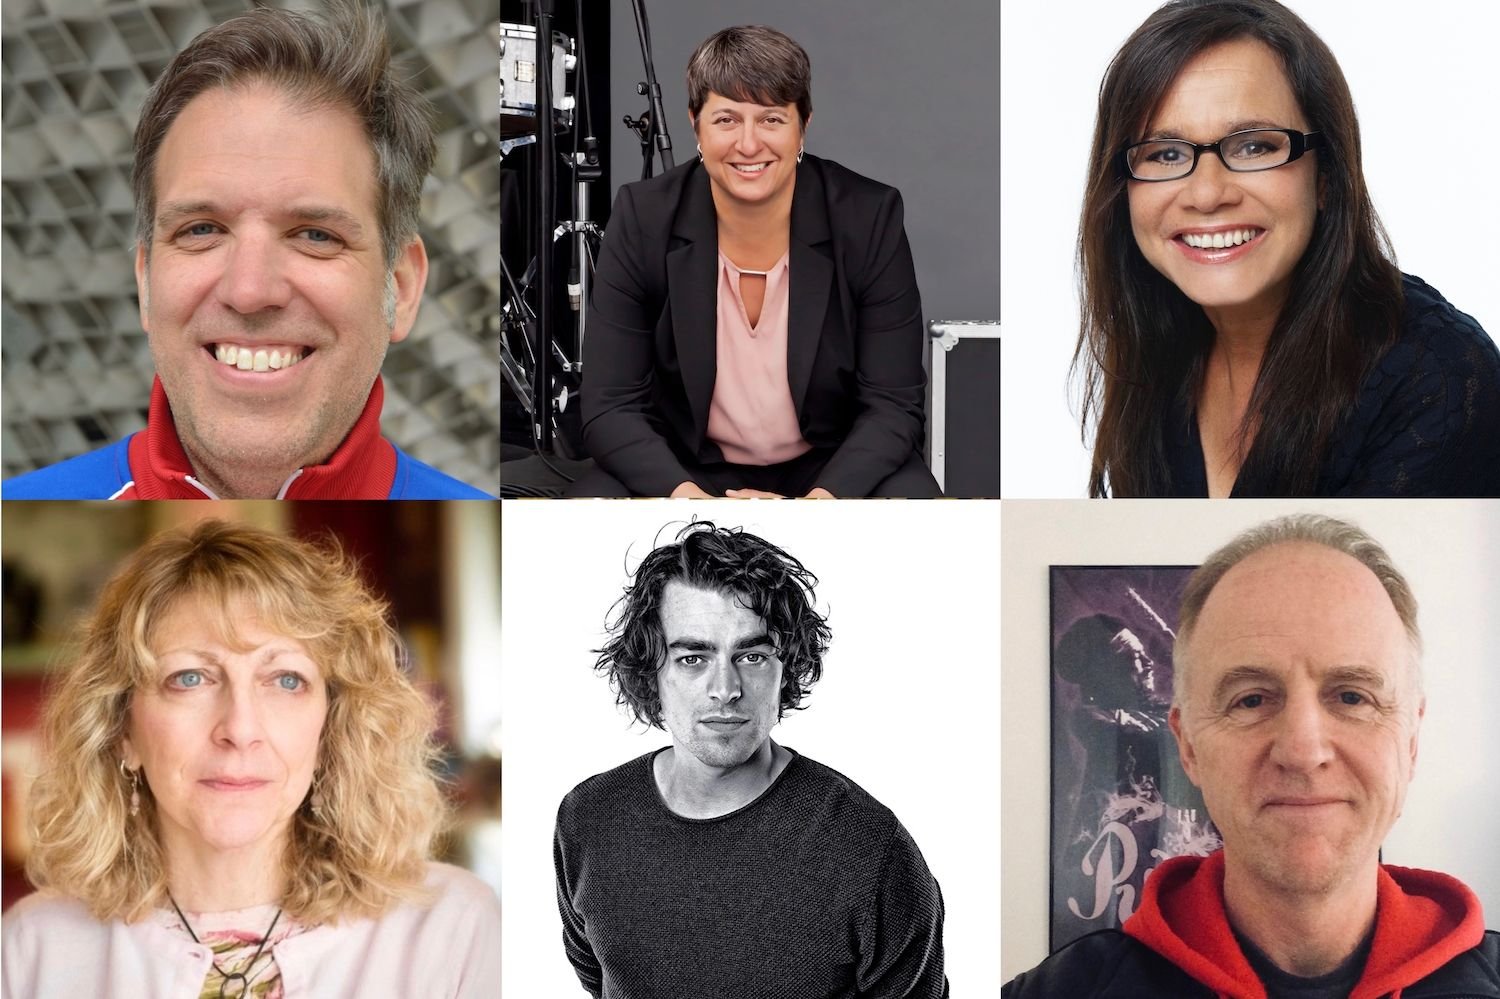 Spotlight on Buyers - First Batch of Speakers Announced for BreakOut West 2018